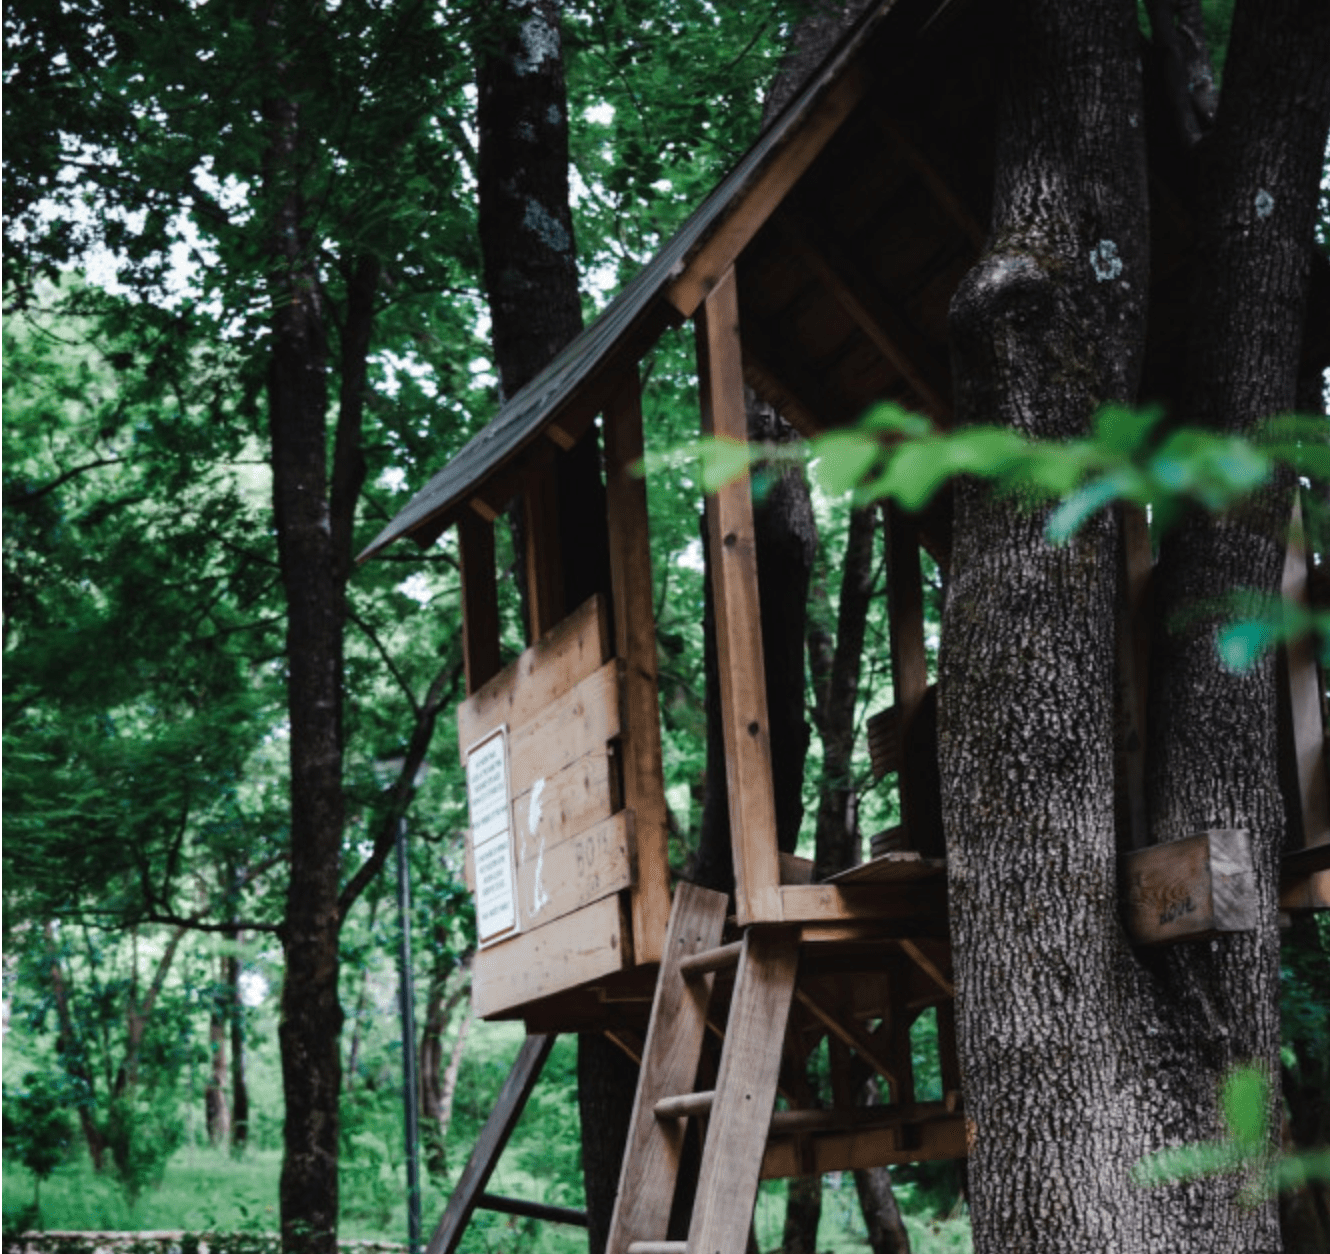 Are Tree Houses Illegal?